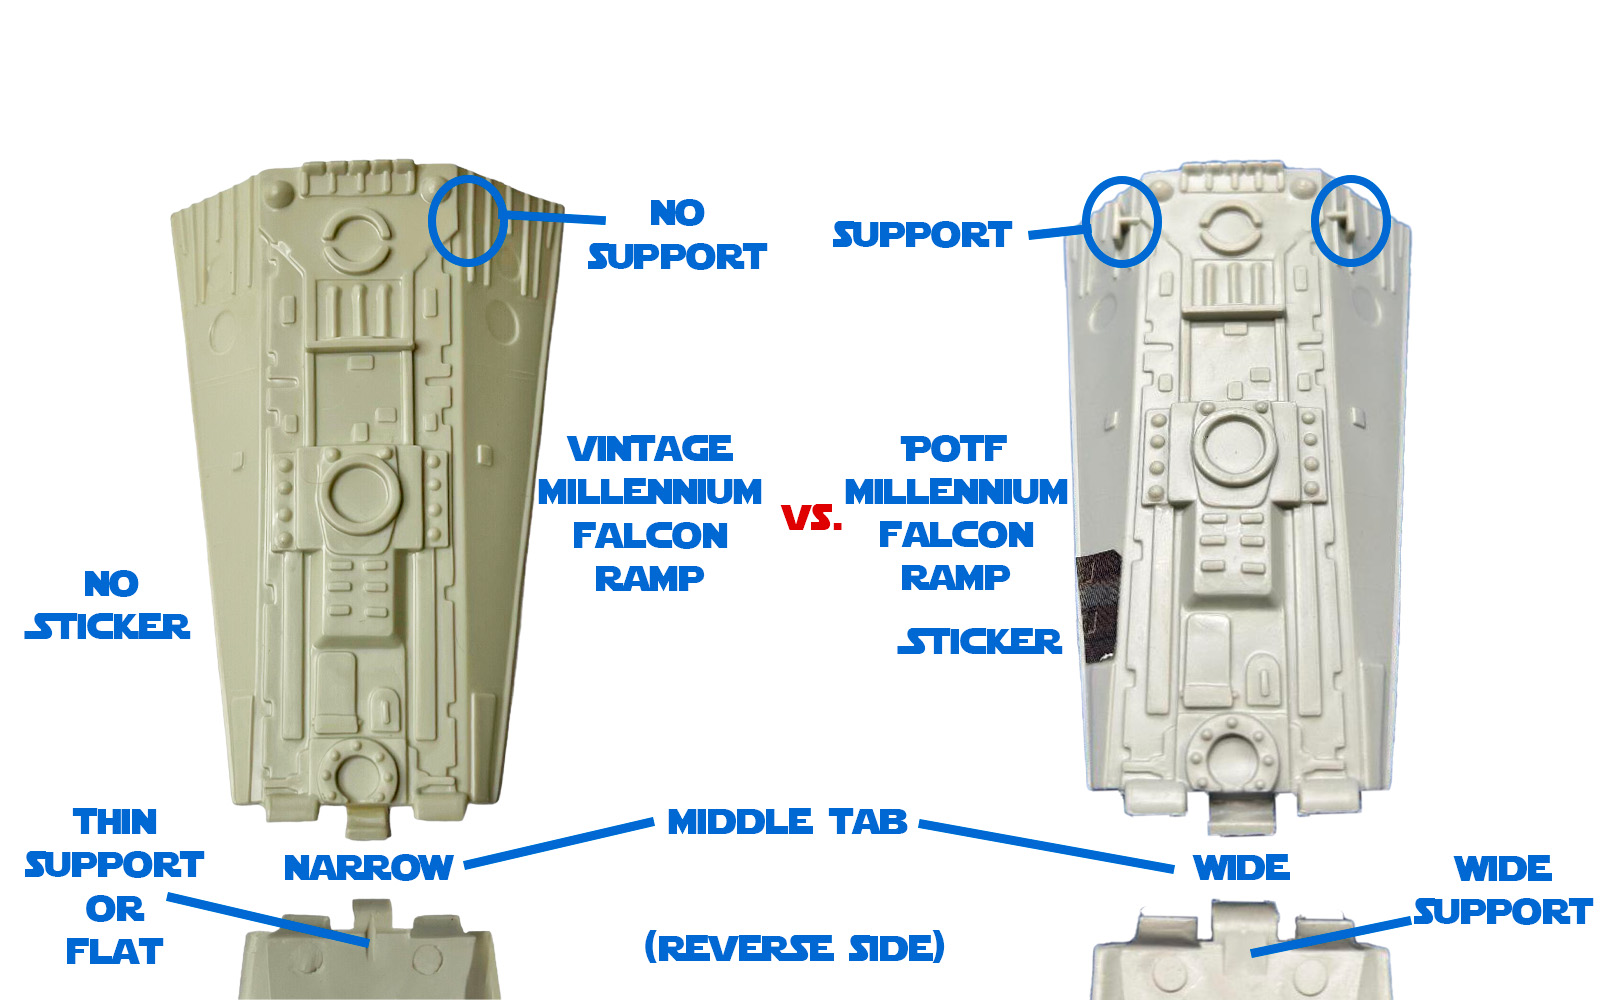 Here's how to tell the difference between a vintage Millennium Falcon ramp and the POTF version.